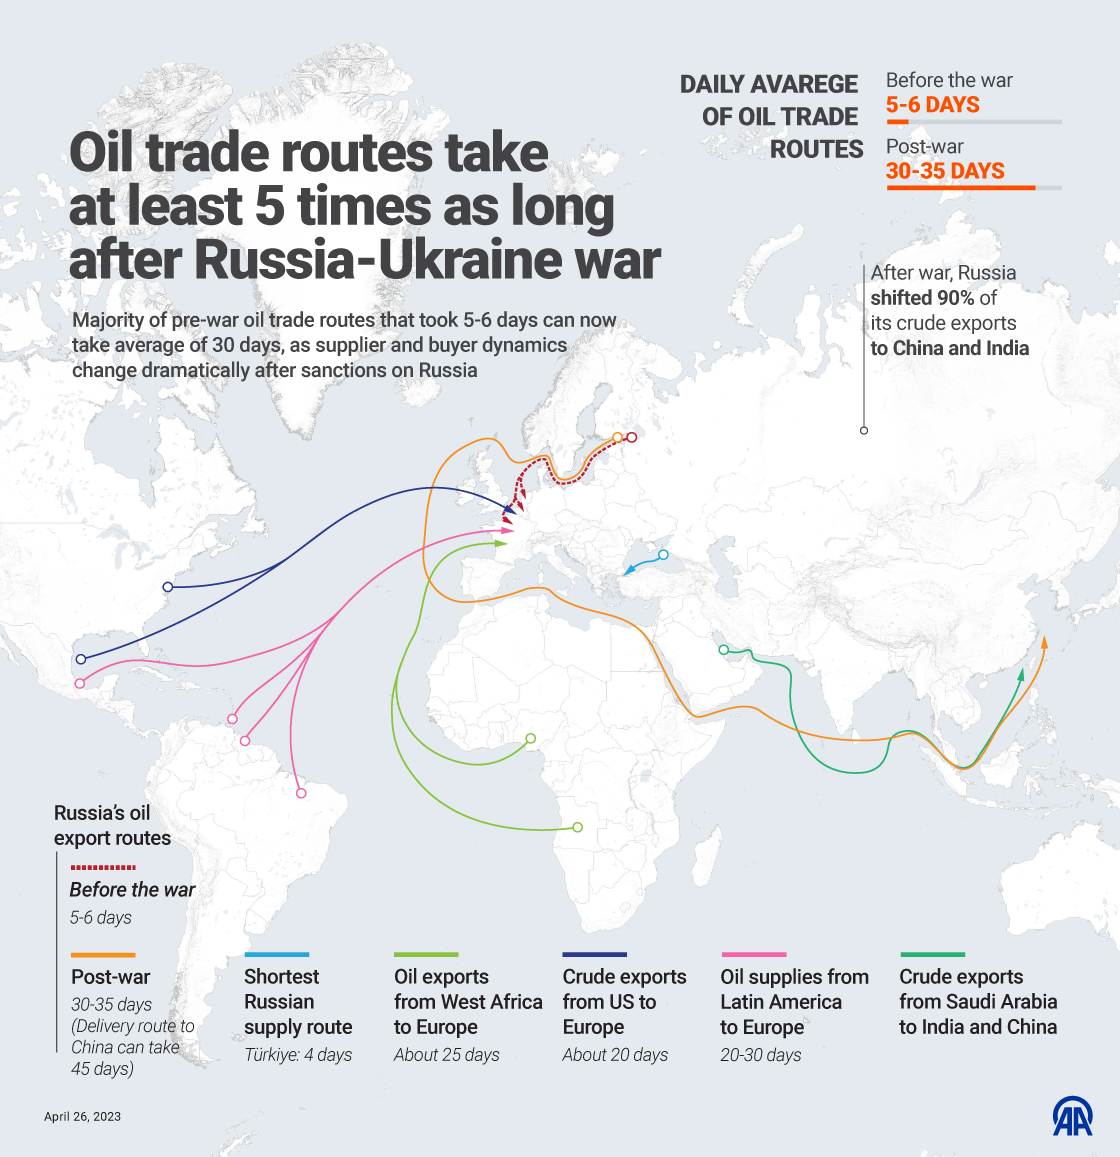 Oil trade routes take at least 5 times as long after Russia-Ukraine war